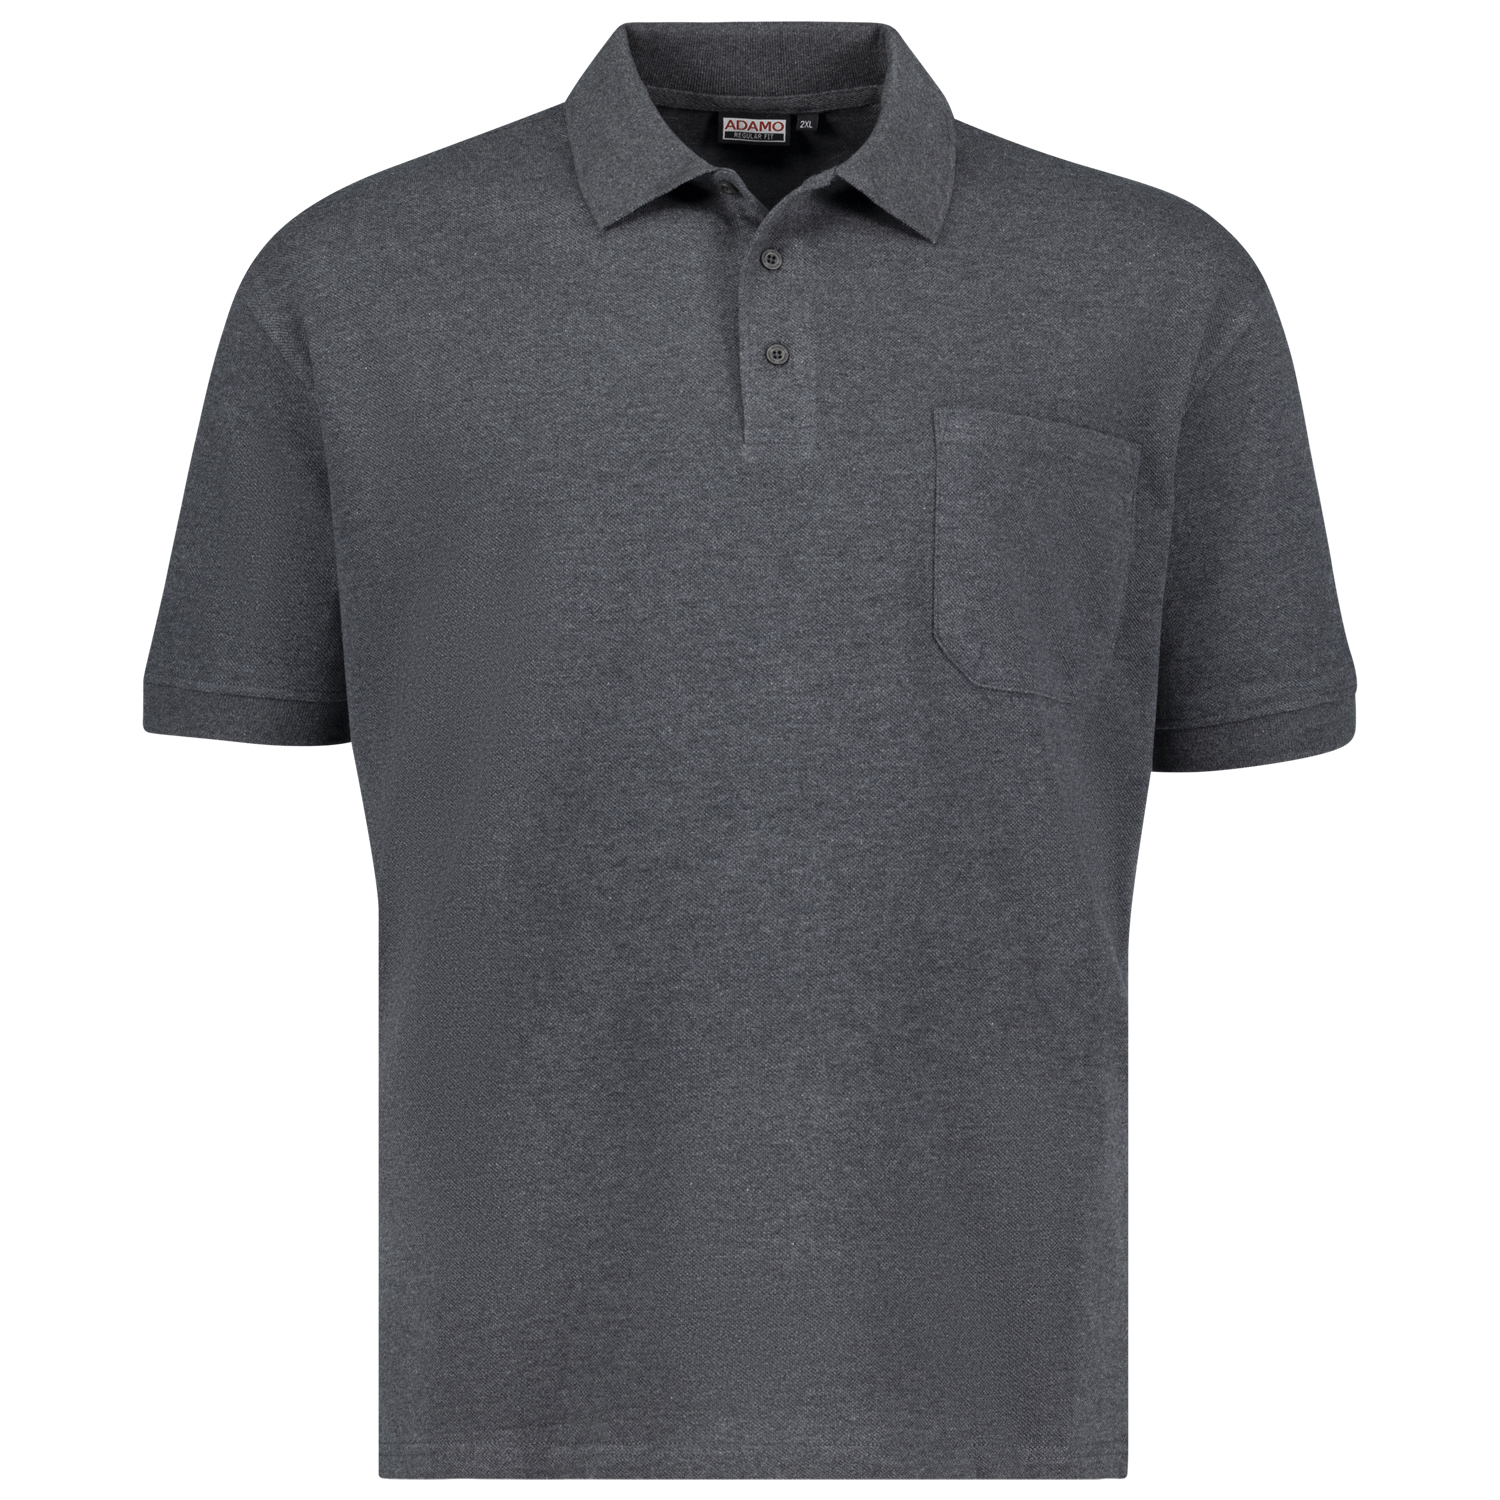 Short sleeve polo shirt REGULAR FIT series Keno by Adamo in anthracite mottled up to oversize 10XL